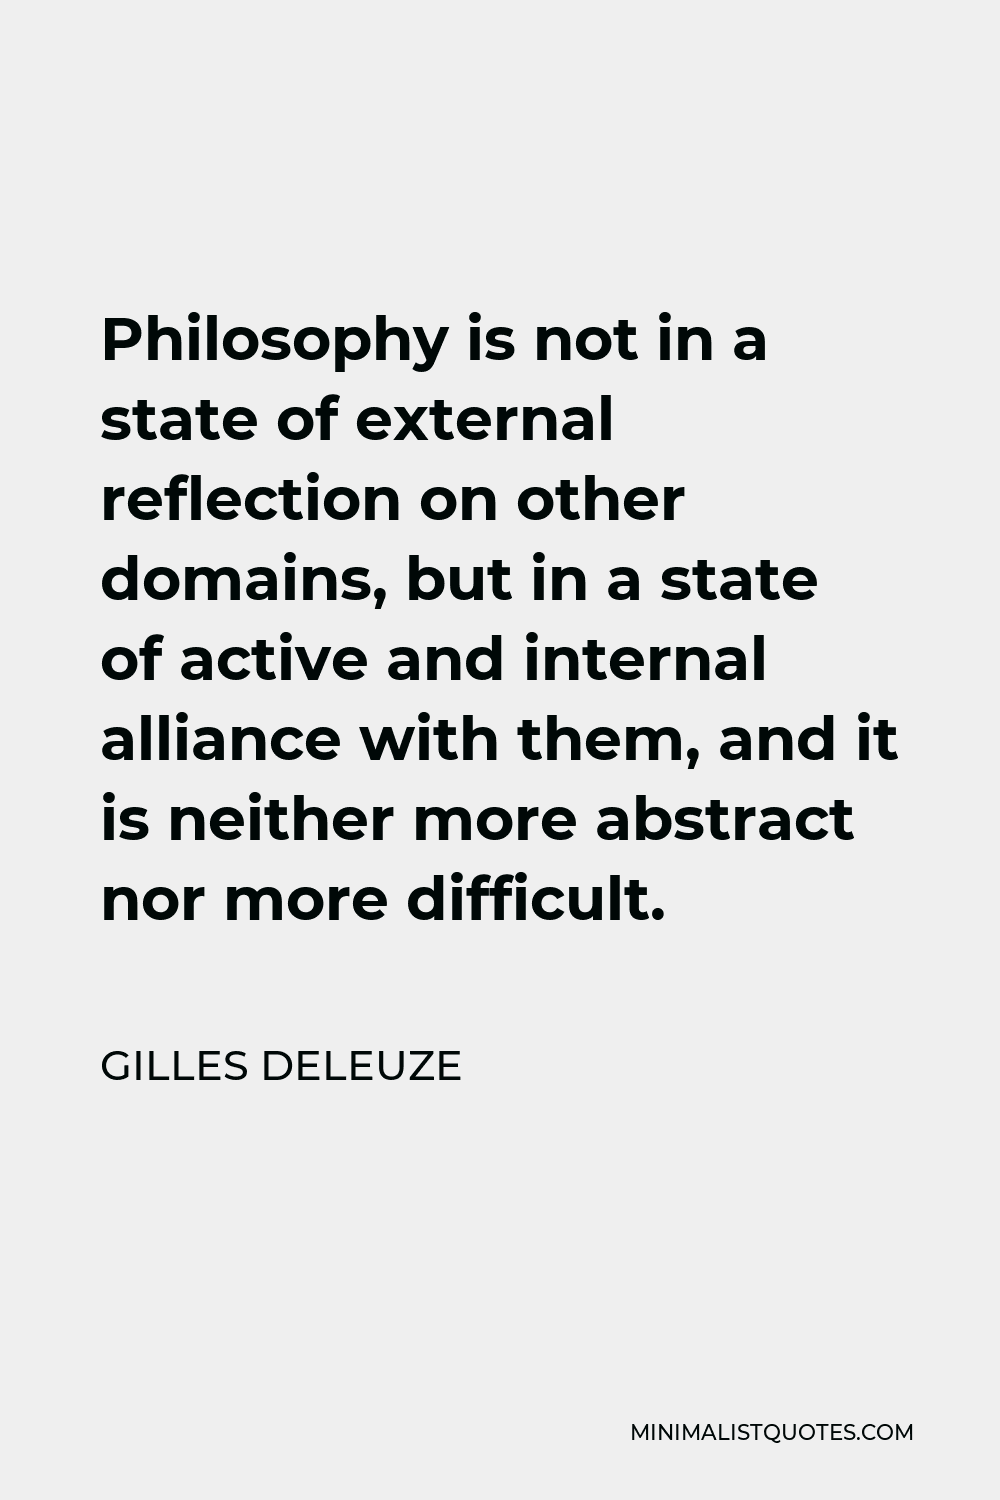 Gilles Deleuze Quote - Philosophy is not in a state of external reflection on other domains, but in a state of active and internal alliance with them, and it is neither more abstract nor more difficult.